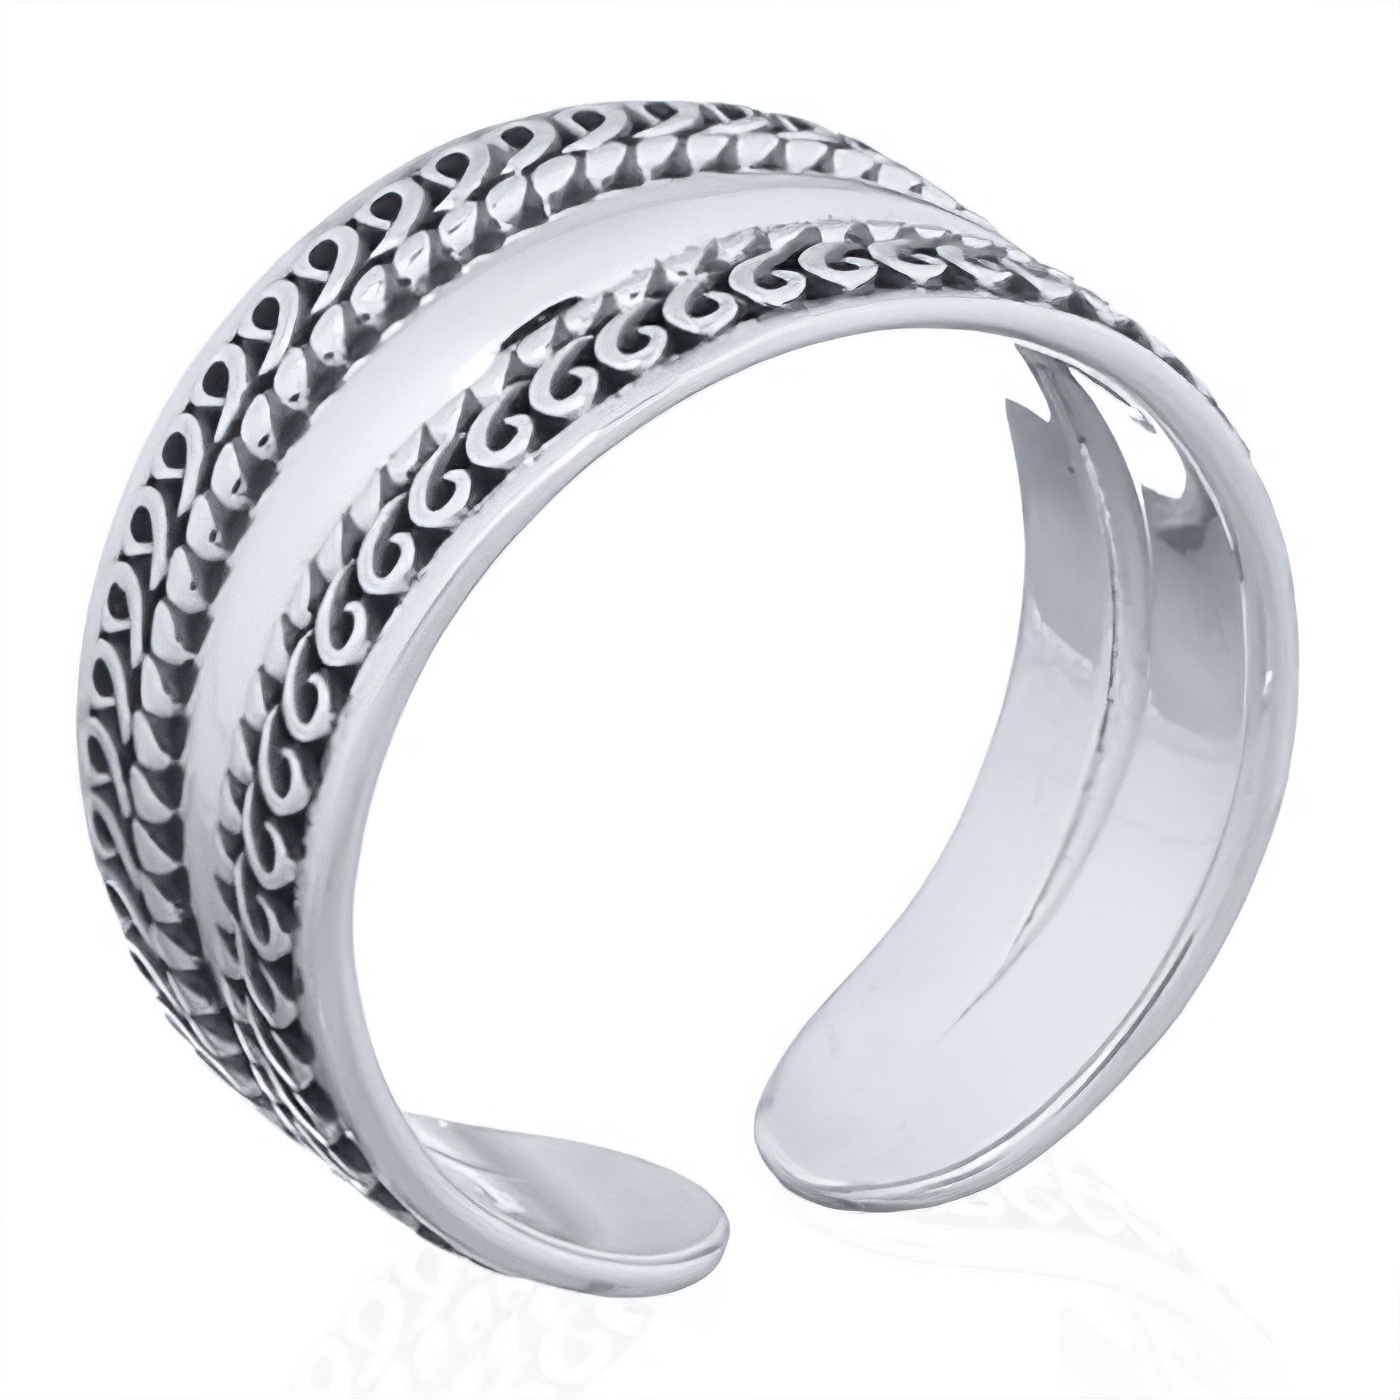 Highly Polished 925 Silver Ring Looping Border Design by BeYindi 